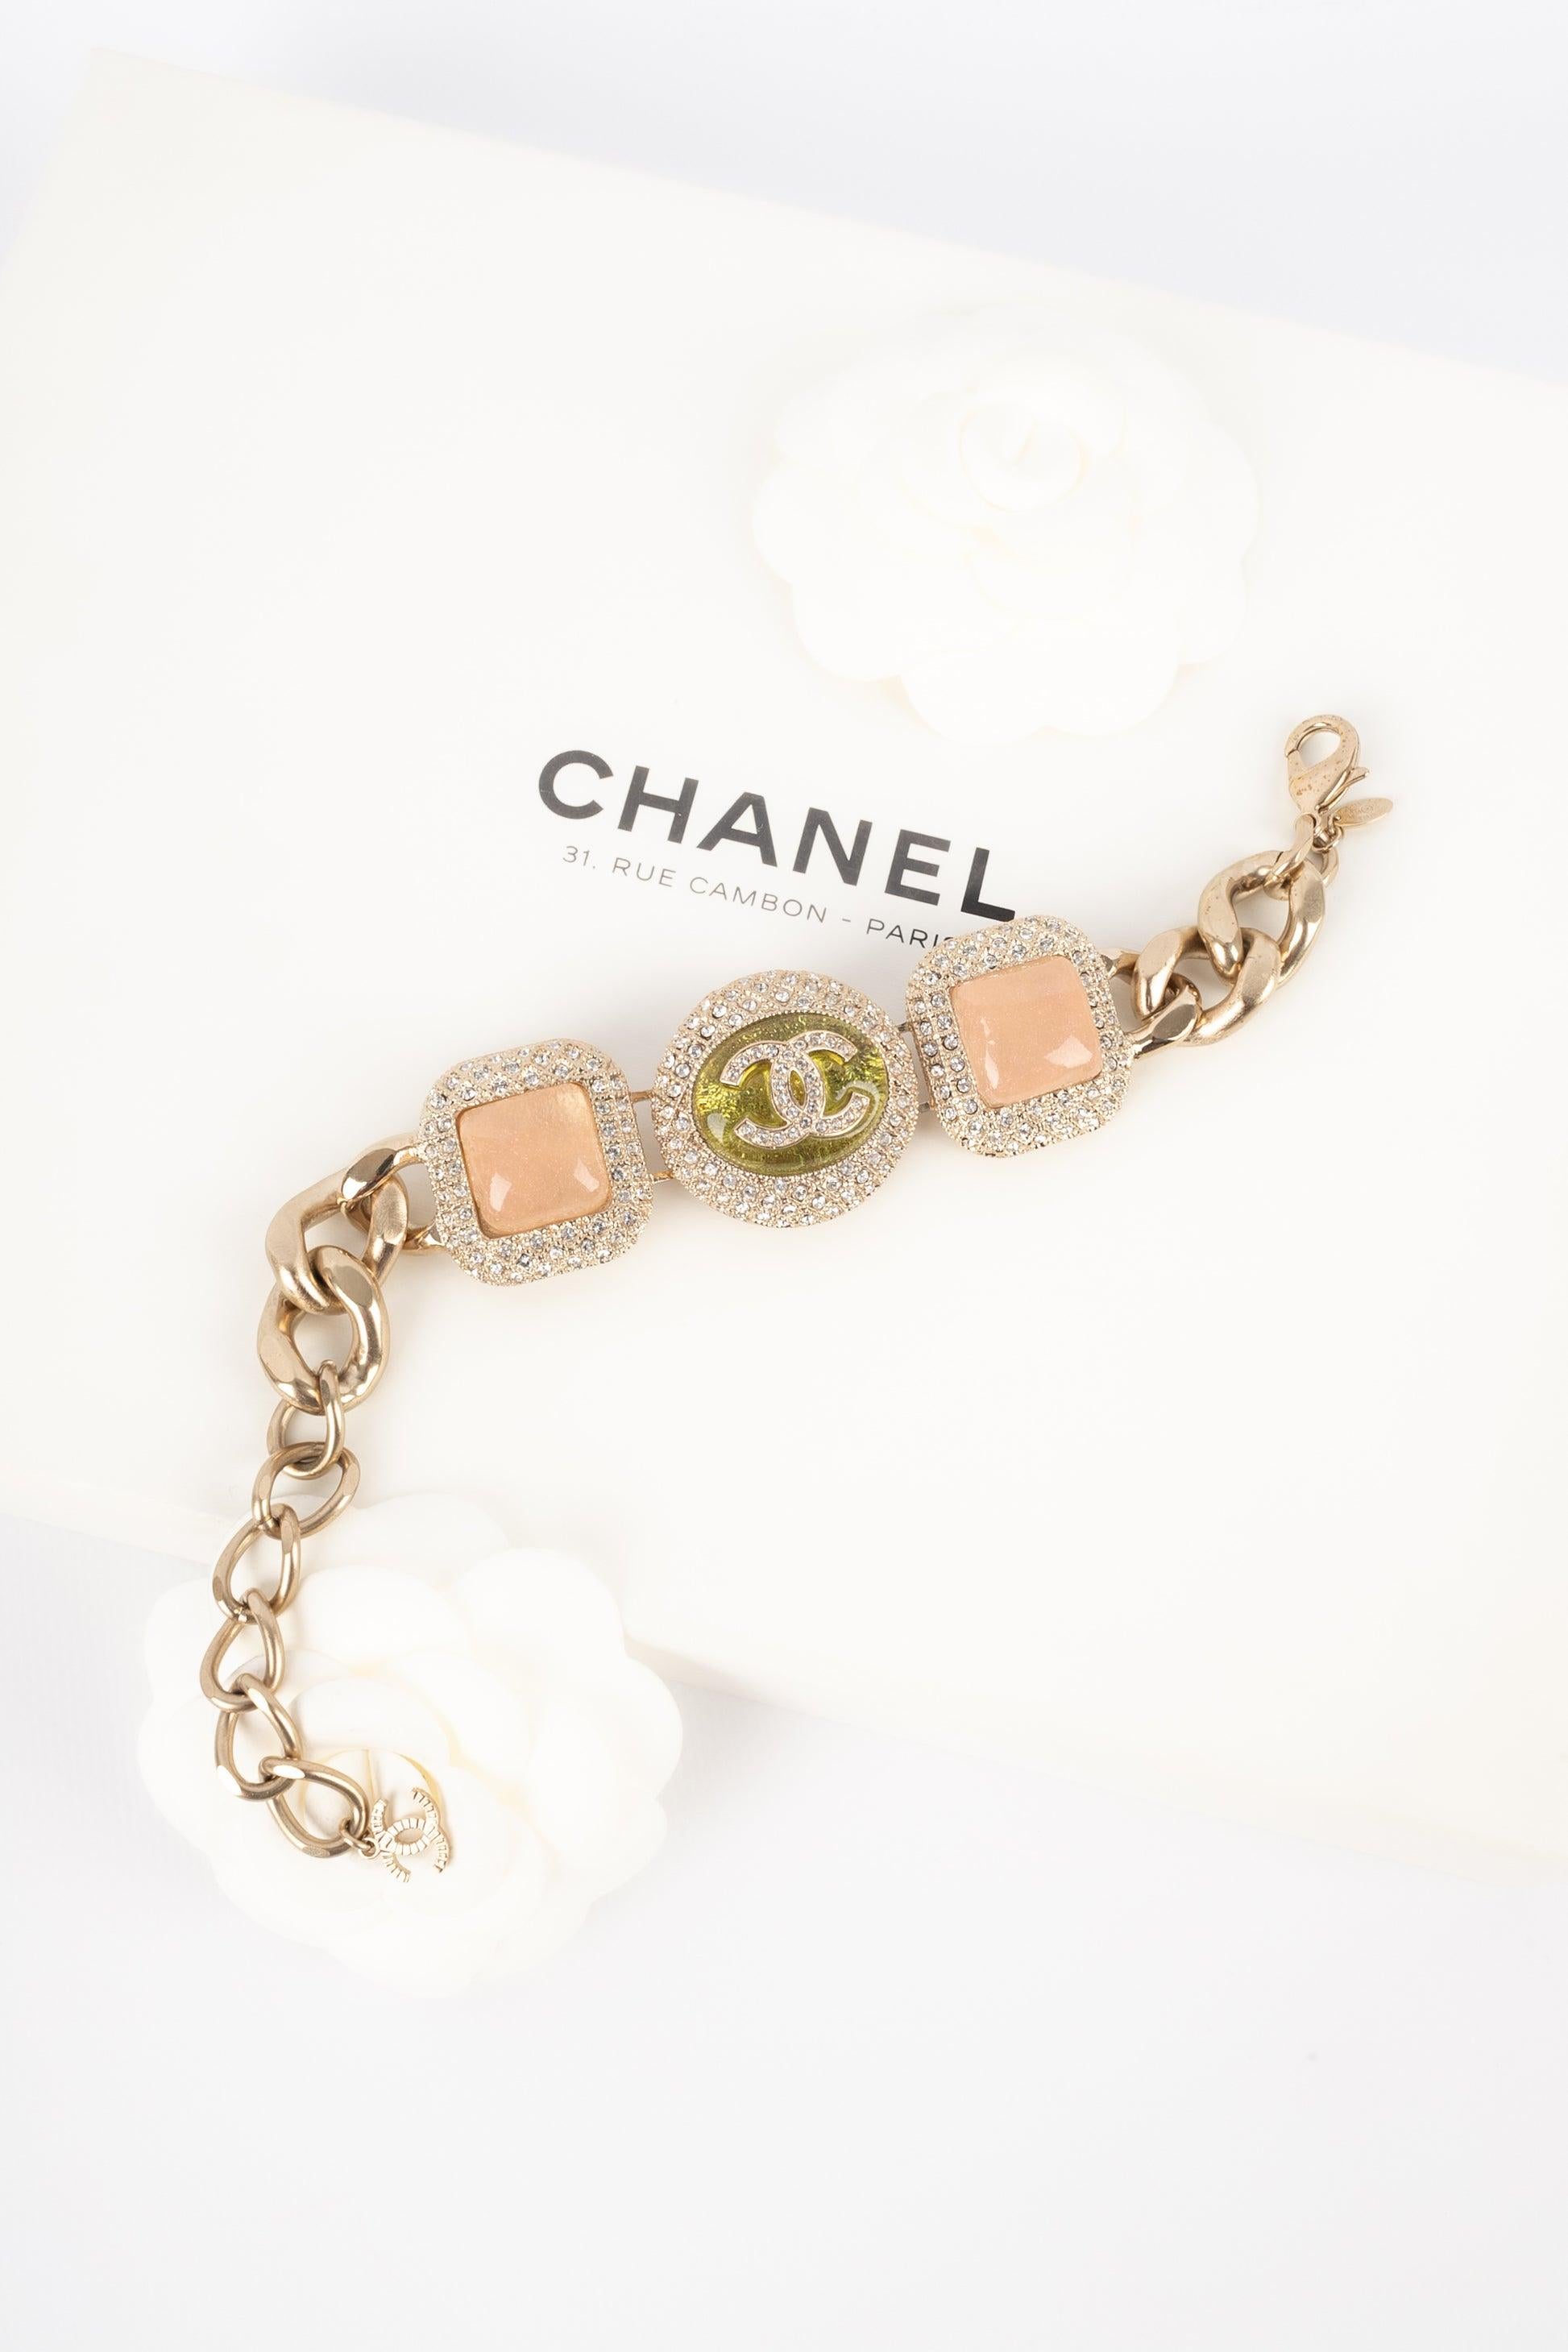 Chanel Bracelet with Swarovski Rhinestones and Resin Cabochons, 2020 For Sale 5